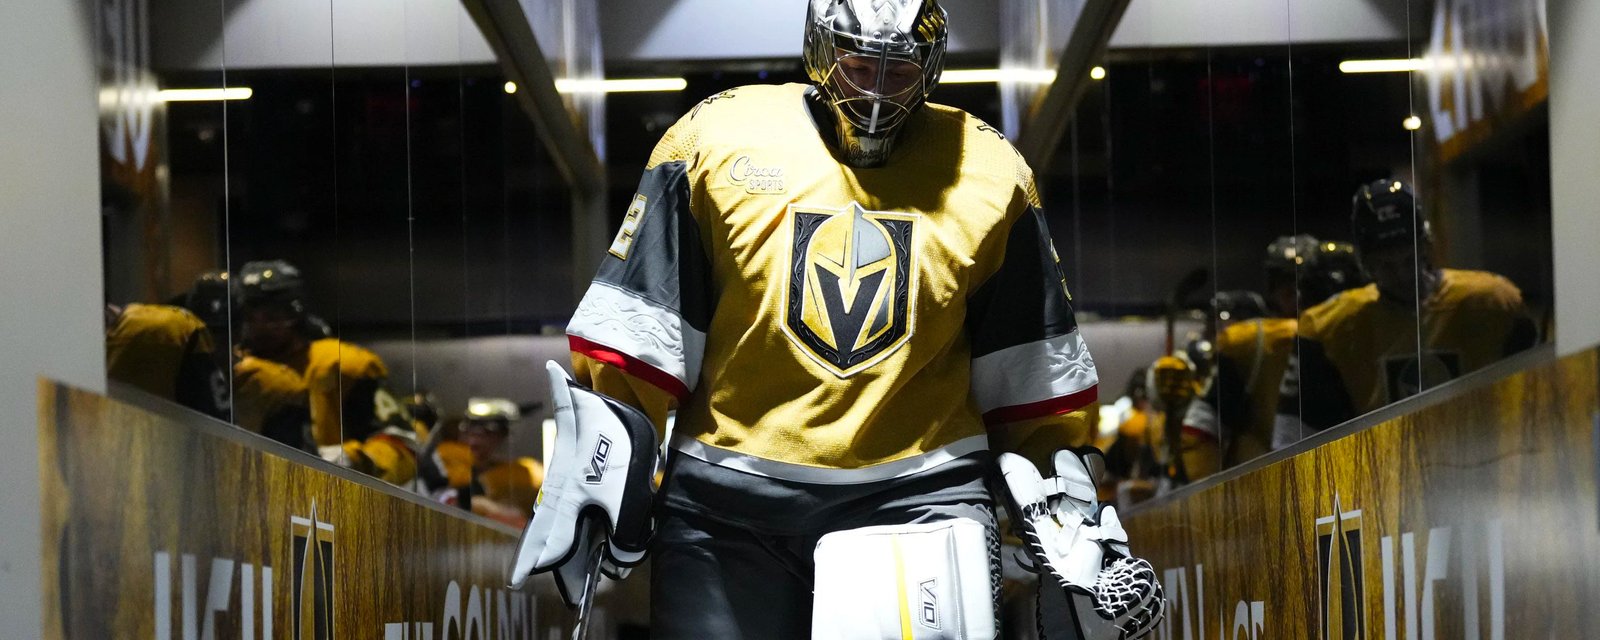 Mysterious drama emerges from Golden Knights’ room in first-round series